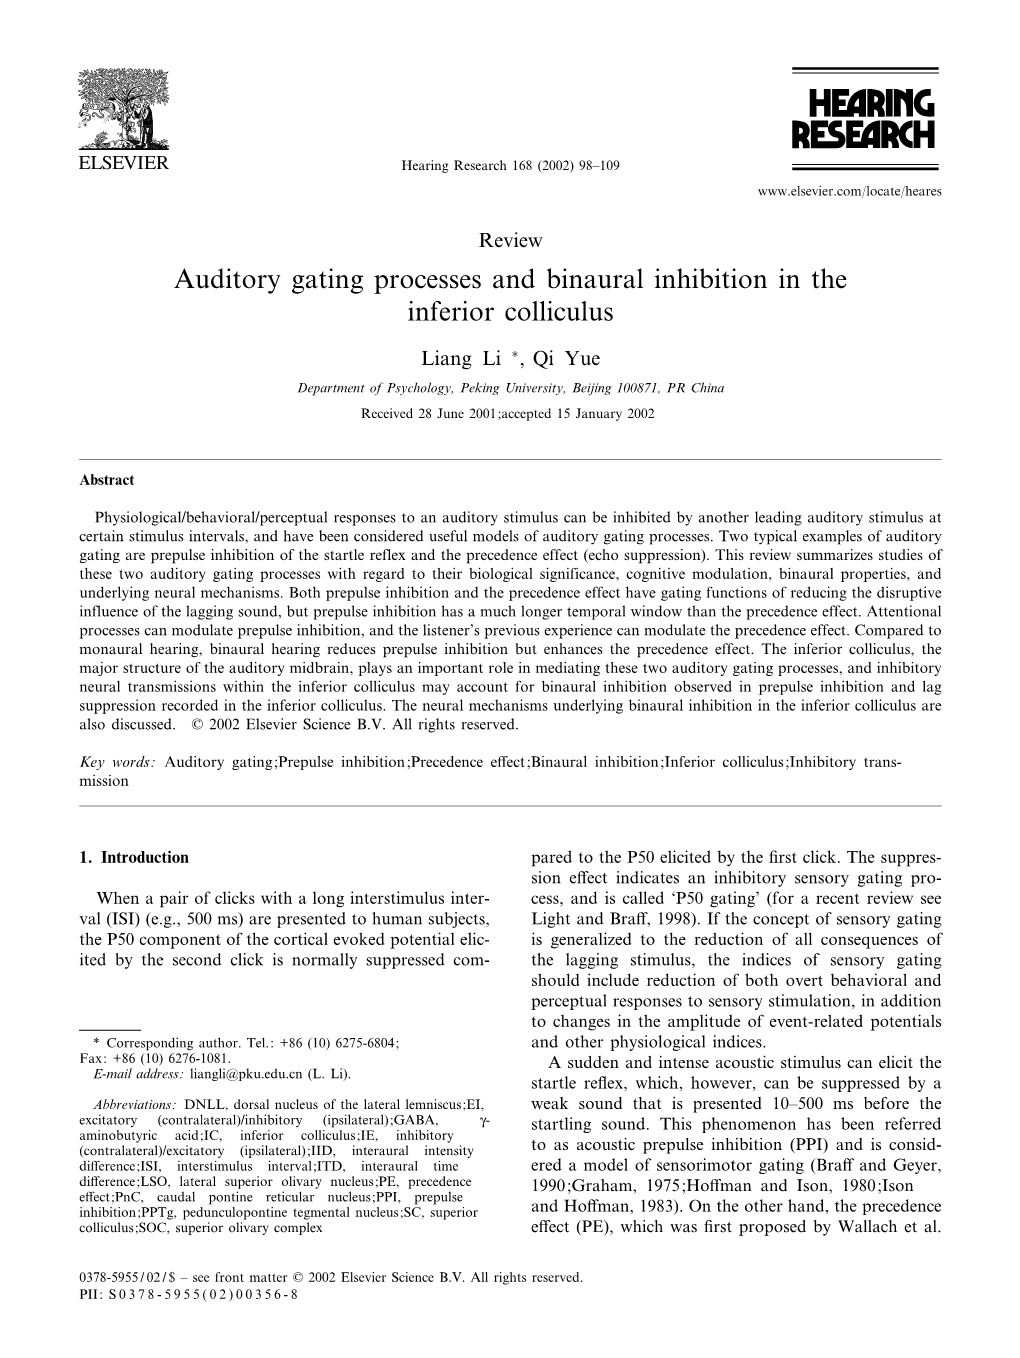 Auditory Gating Processes and Binaural Inhibition in the Inferior Colliculus